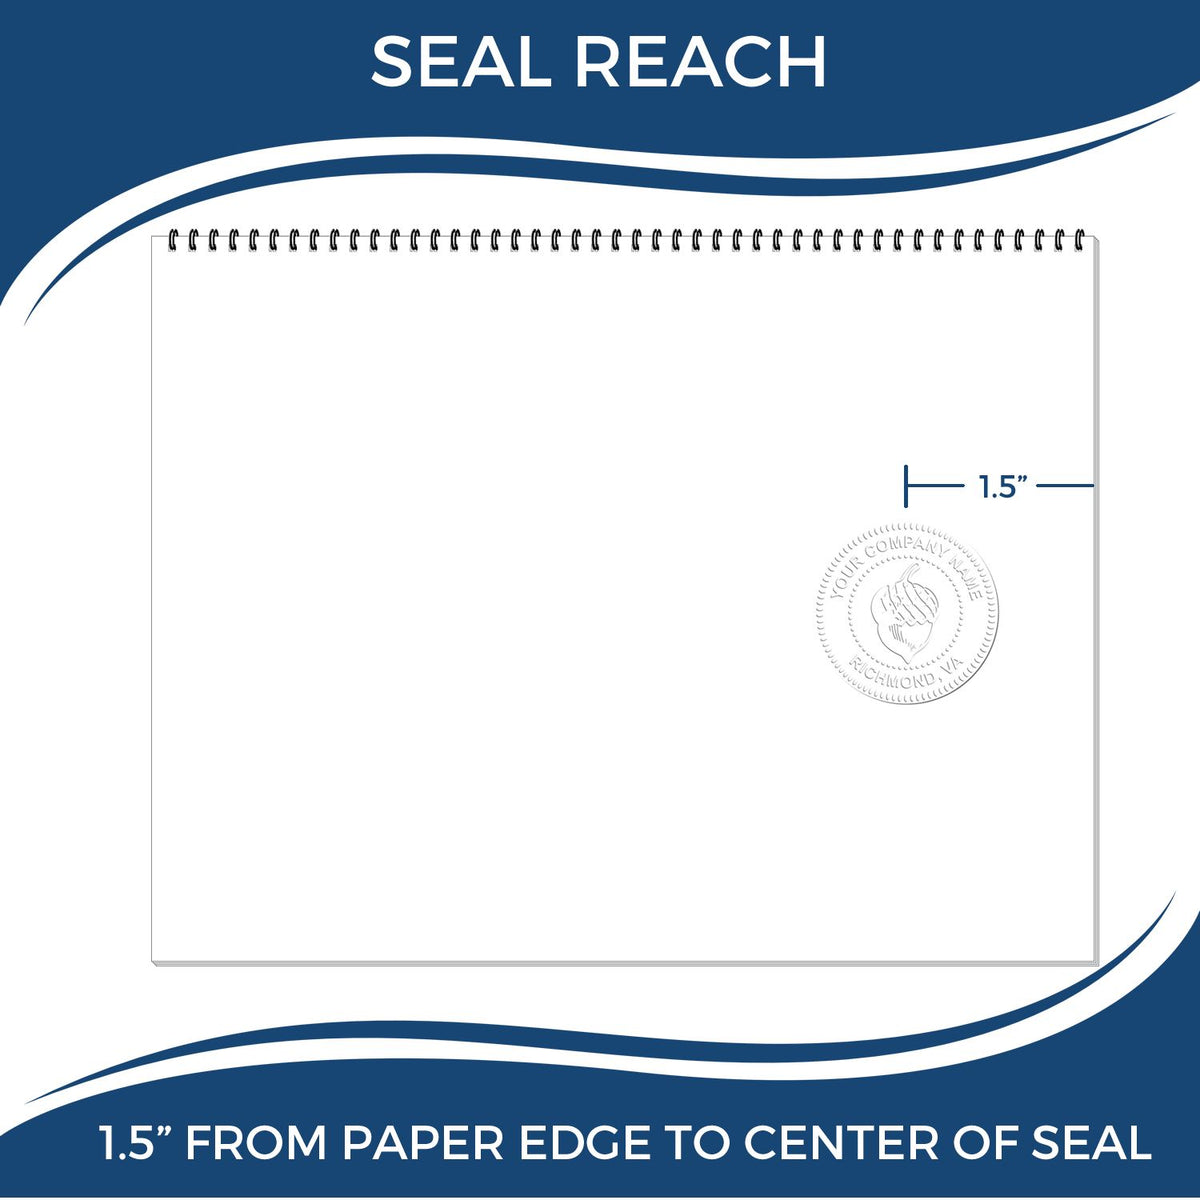 An infographic showing the seal reach which is represented by a ruler and a miniature seal image of the Hybrid Minnesota Landscape Architect Seal